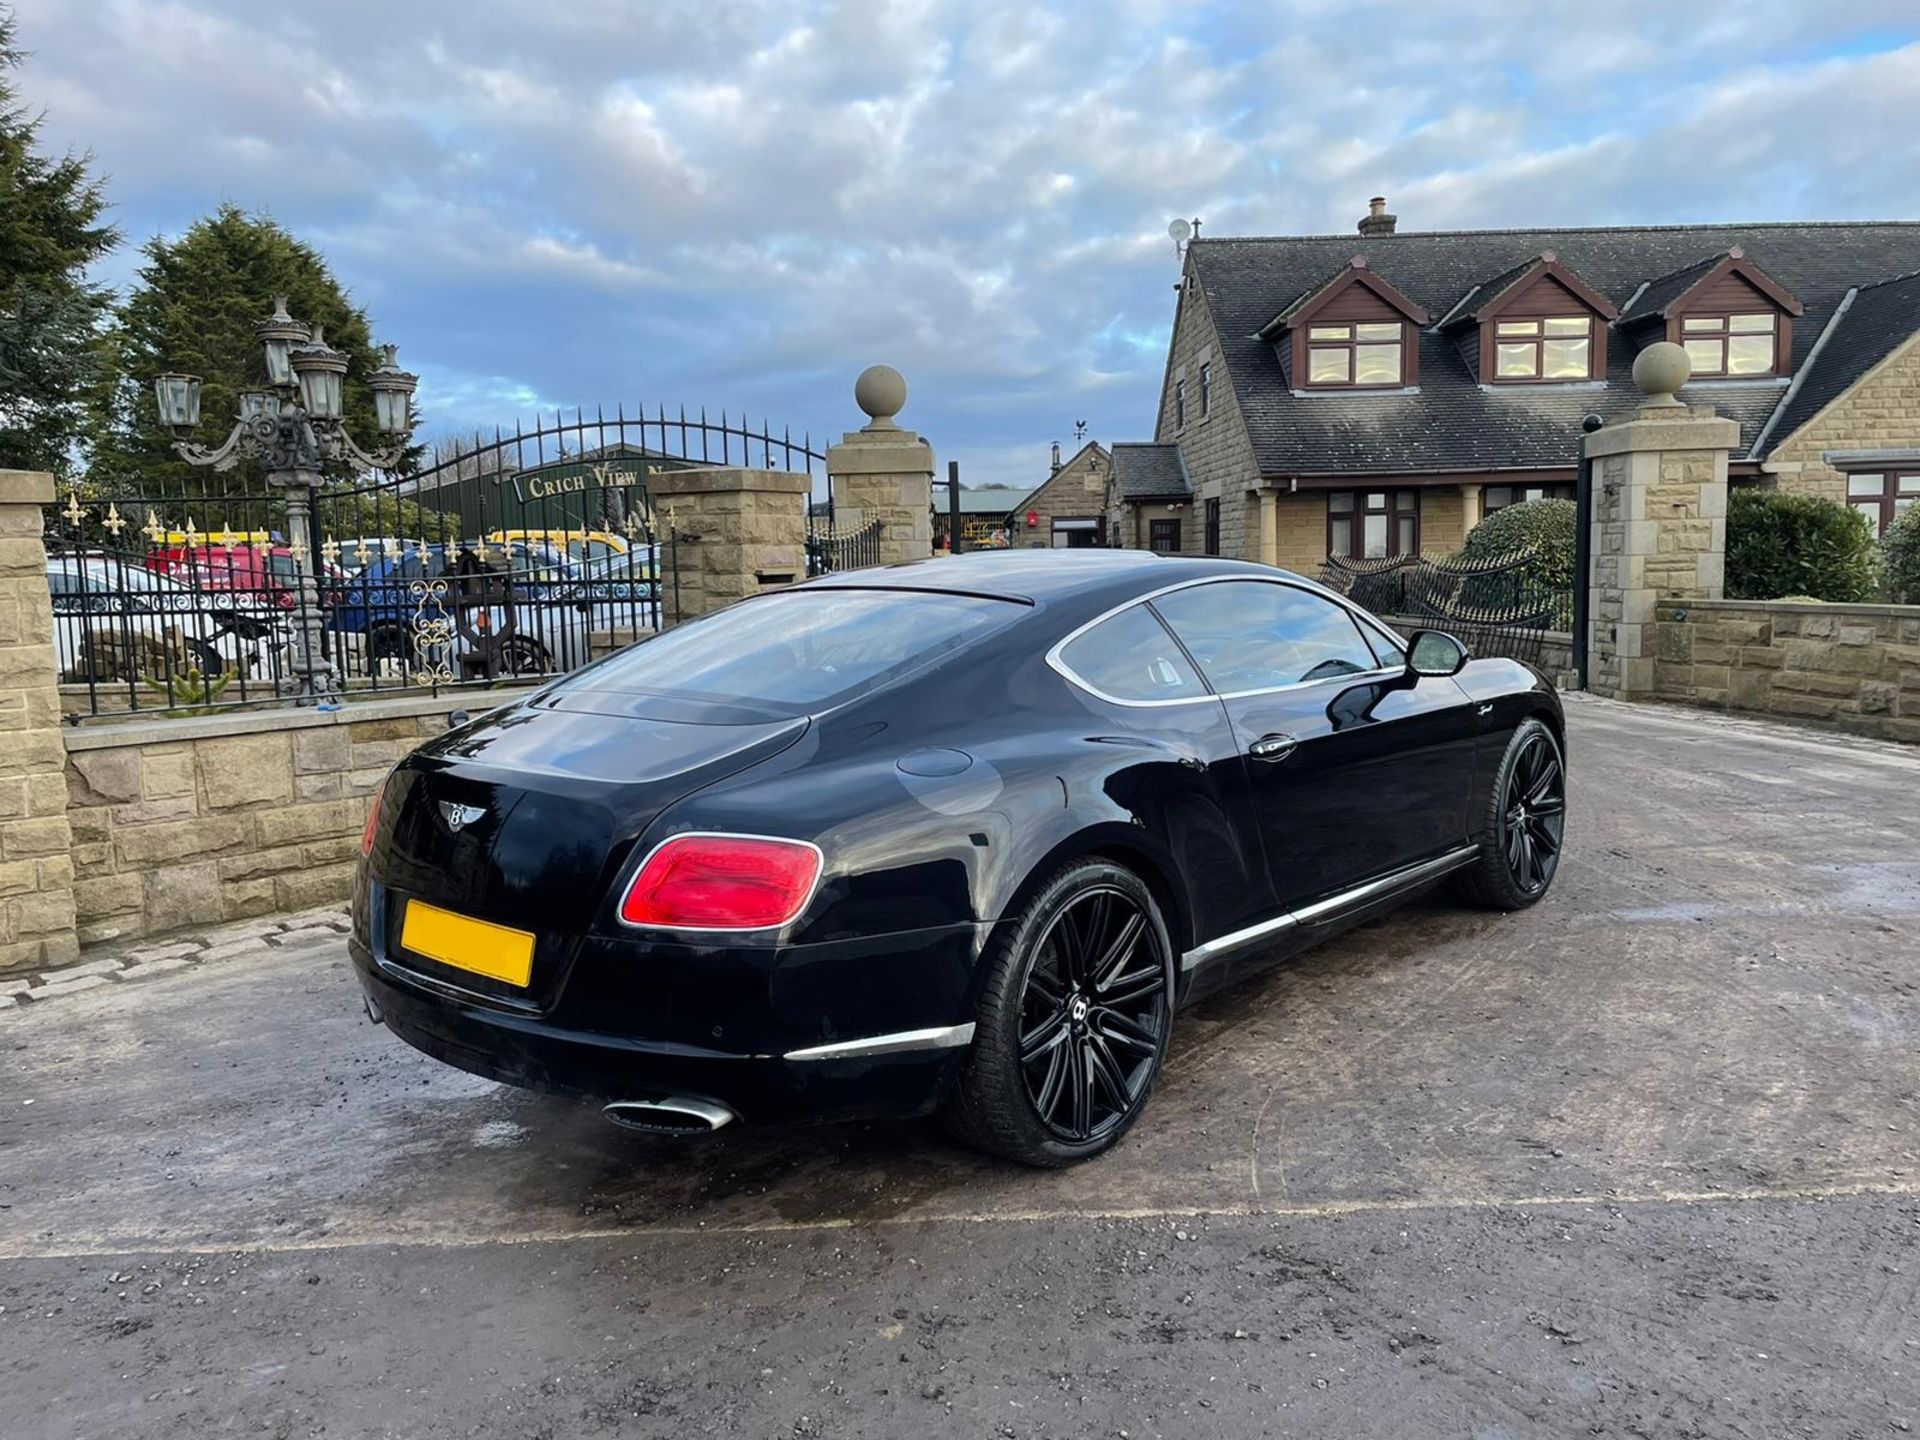 2014/14 REG BENTLEY CONTINENTAL GT SPEED 6.0 AUTO BLACK COUPE 626 HP- FULL BENTLEY SERVICE HISTORY - Image 7 of 26